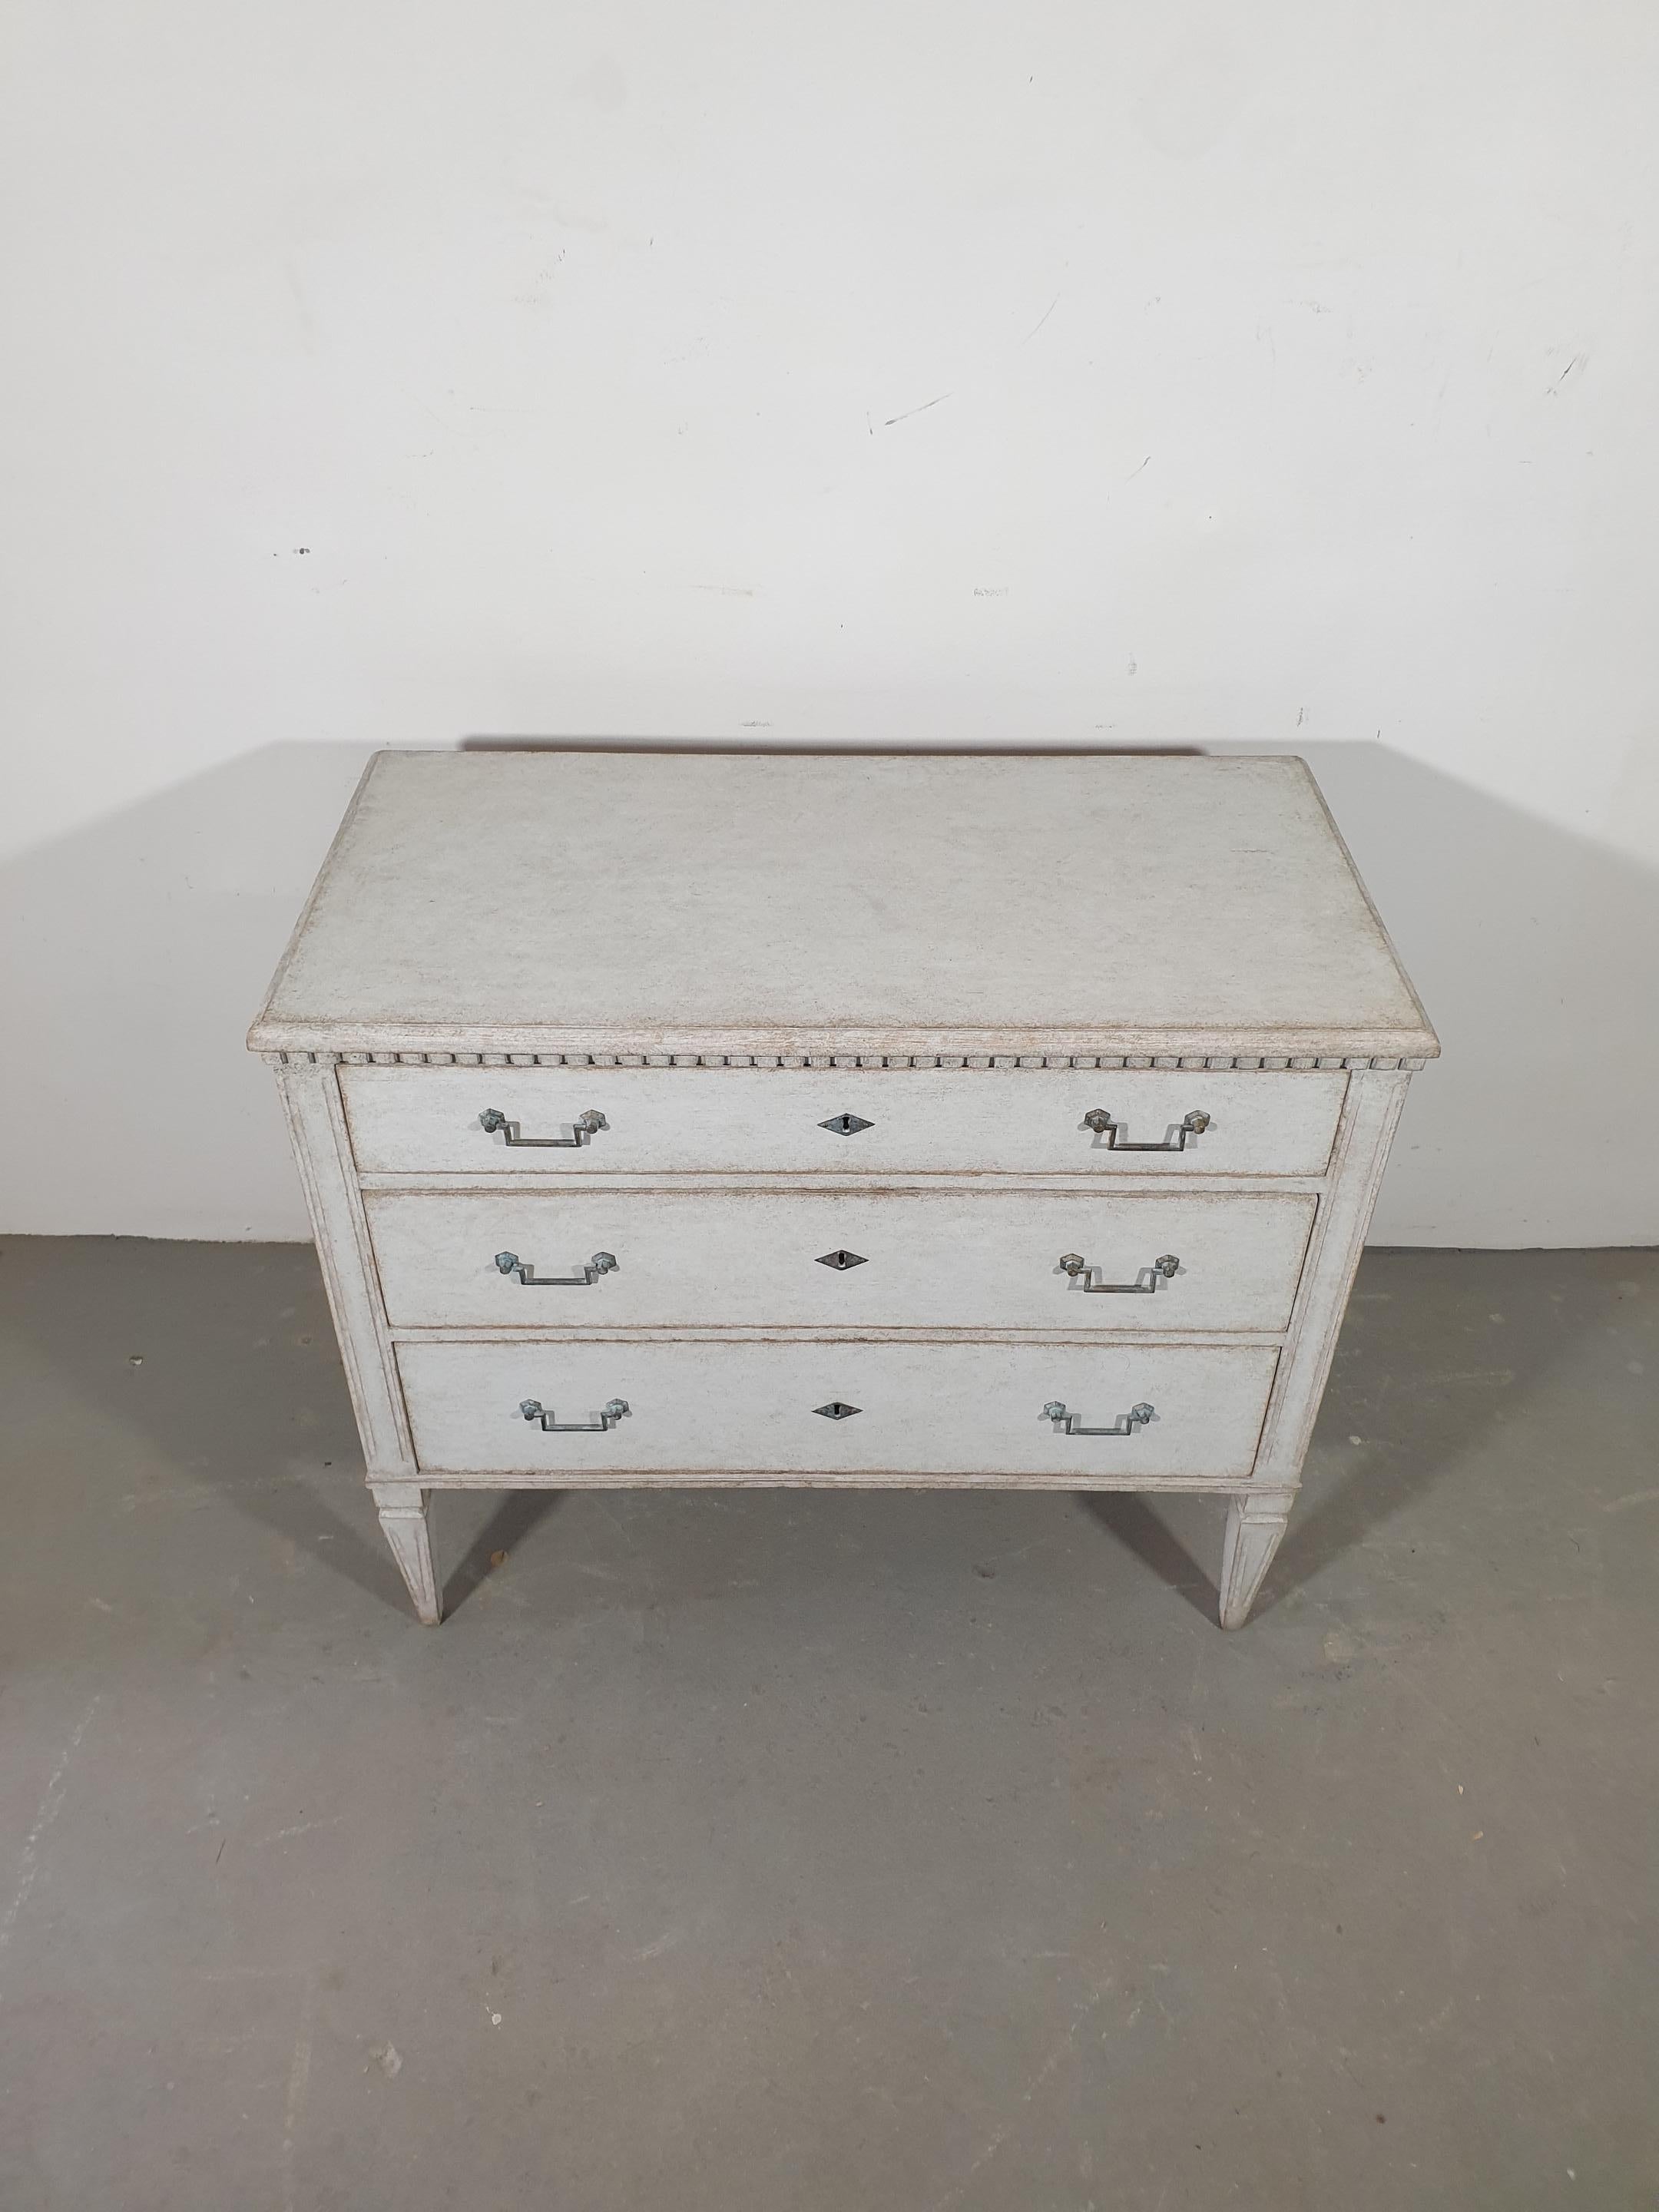 A Swedish Gustavian style three-drawer chest from the 19th century with carved dentil molding and tapered legs. This Swedish Gustavian style three-drawer chest from the 19th century is an elegant piece that beautifully captures the essence of the